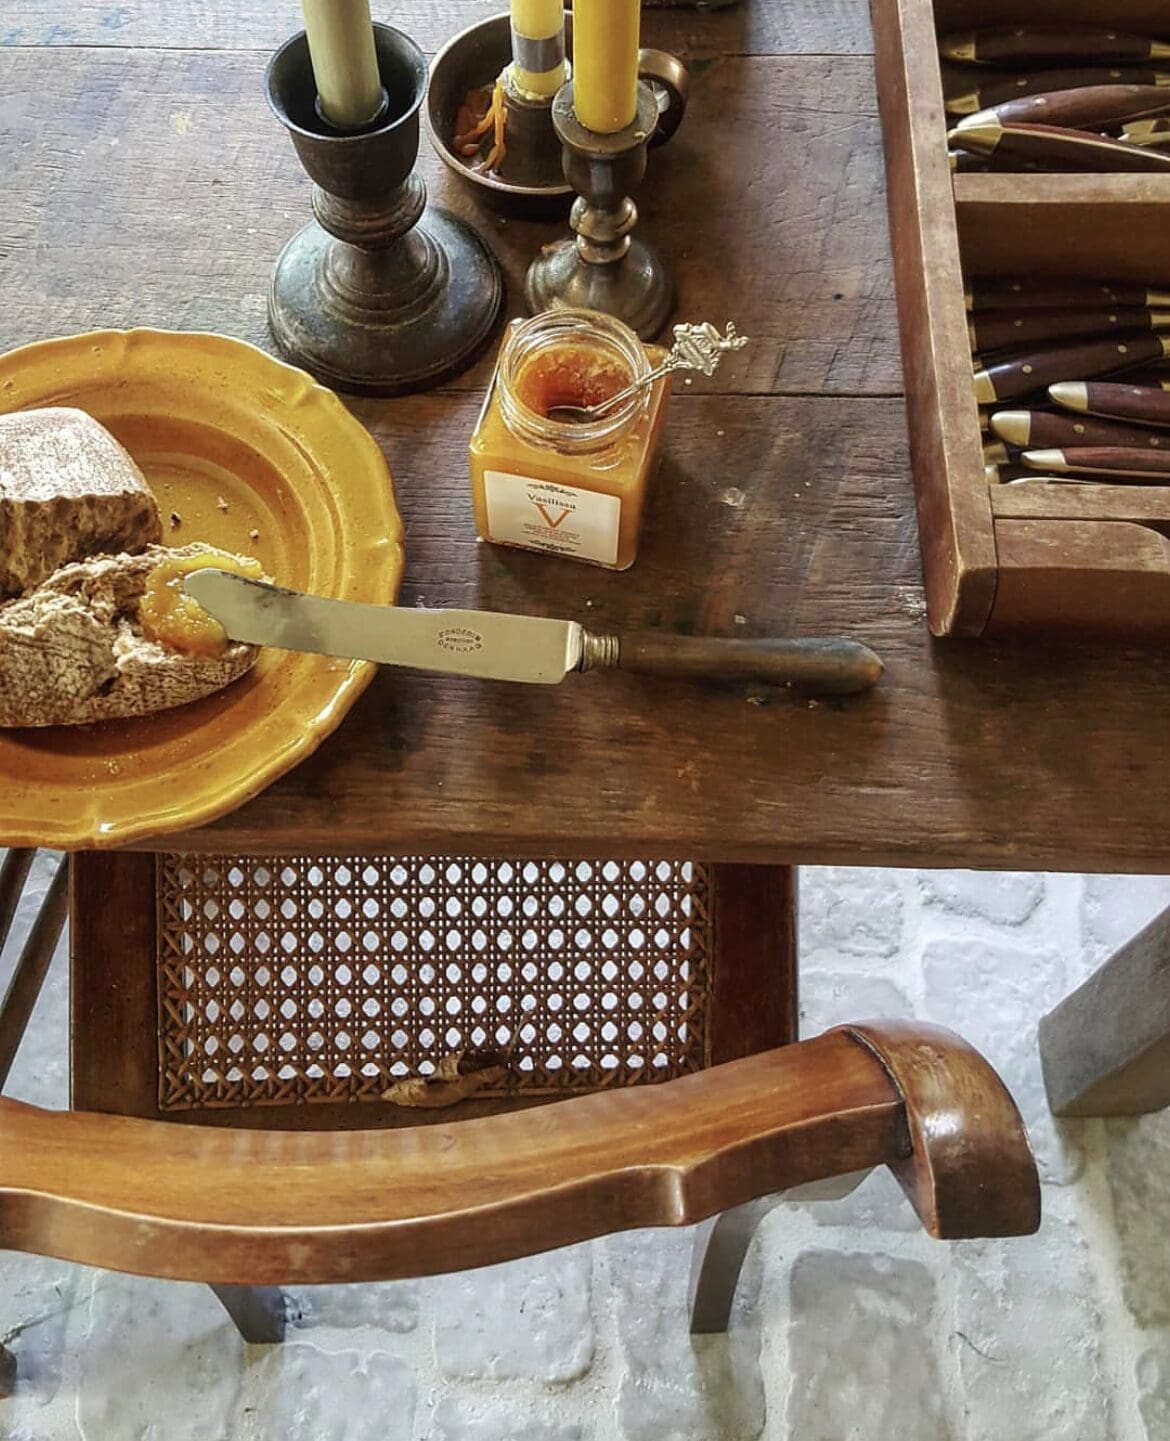 The best restaurants in Amsterdam | A dark wooden table with a knife spreading jam on bread.